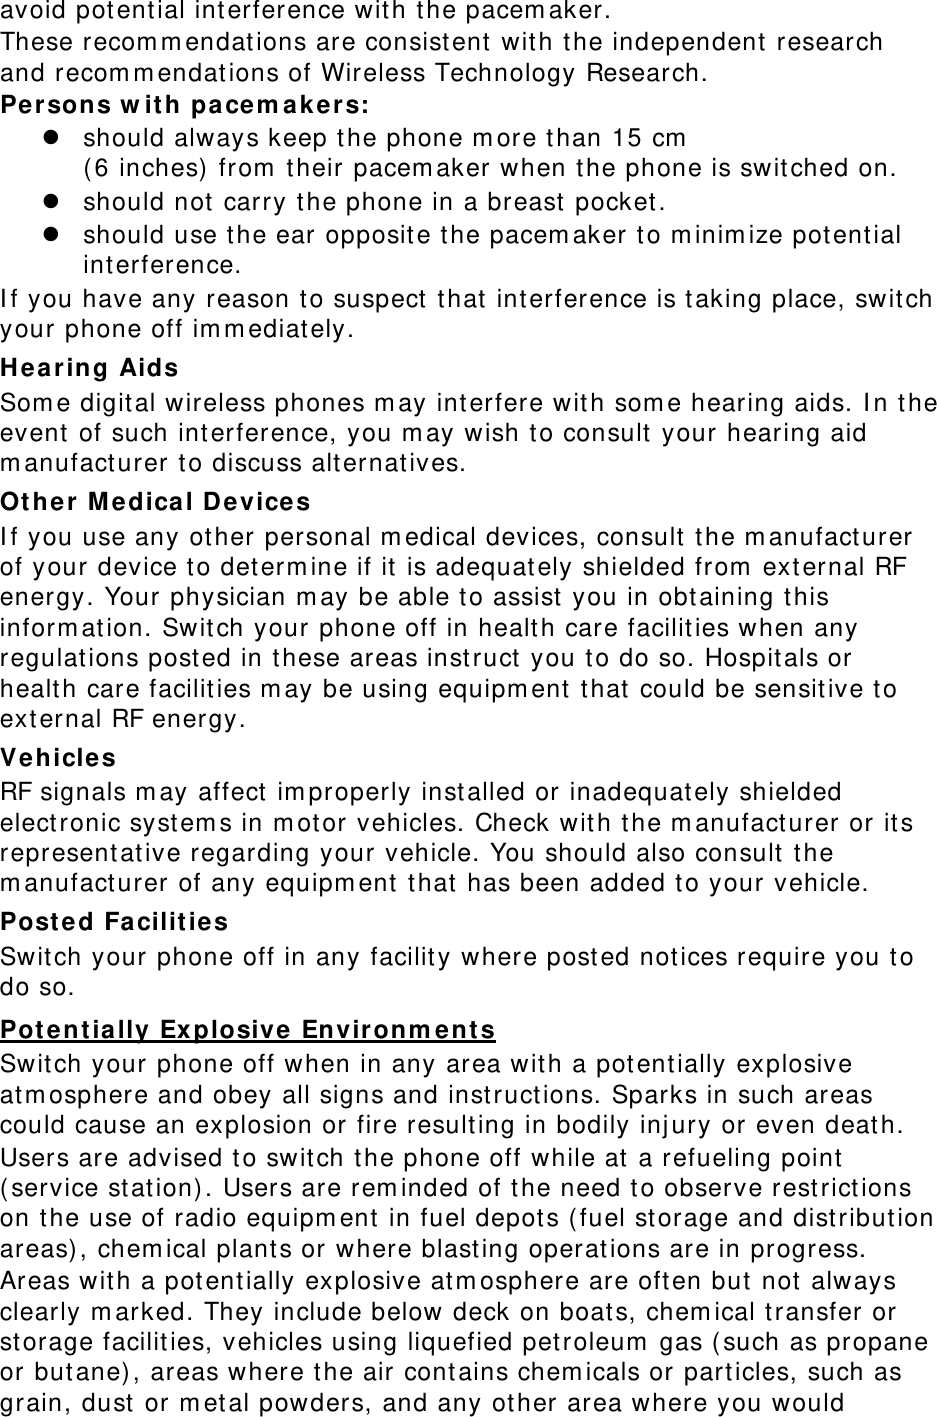 avoid potential interference with the pacemaker. These recommendations are consistent with the independent research and recommendations of Wireless Technology Research. Persons with pacemakers: z should always keep the phone more than 15 cm  (6 inches) from their pacemaker when the phone is switched on. z should not carry the phone in a breast pocket. z should use the ear opposite the pacemaker to minimize potential interference. If you have any reason to suspect that interference is taking place, switch your phone off immediately. Hearing Aids Some digital wireless phones may interfere with some hearing aids. In the event of such interference, you may wish to consult your hearing aid manufacturer to discuss alternatives. Other Medical Devices If you use any other personal medical devices, consult the manufacturer of your device to determine if it is adequately shielded from external RF energy. Your physician may be able to assist you in obtaining this information. Switch your phone off in health care facilities when any regulations posted in these areas instruct you to do so. Hospitals or health care facilities may be using equipment that could be sensitive to external RF energy. Vehicles RF signals may affect improperly installed or inadequately shielded electronic systems in motor vehicles. Check with the manufacturer or its representative regarding your vehicle. You should also consult the manufacturer of any equipment that has been added to your vehicle. Posted Facilities Switch your phone off in any facility where posted notices require you to do so. Potentially Explosive Environments Switch your phone off when in any area with a potentially explosive atmosphere and obey all signs and instructions. Sparks in such areas could cause an explosion or fire resulting in bodily injury or even death. Users are advised to switch the phone off while at a refueling point (service station). Users are reminded of the need to observe restrictions on the use of radio equipment in fuel depots (fuel storage and distribution areas), chemical plants or where blasting operations are in progress. Areas with a potentially explosive atmosphere are often but not always clearly marked. They include below deck on boats, chemical transfer or storage facilities, vehicles using liquefied petroleum gas (such as propane or butane), areas where the air contains chemicals or particles, such as grain, dust or metal powders, and any other area where you would 